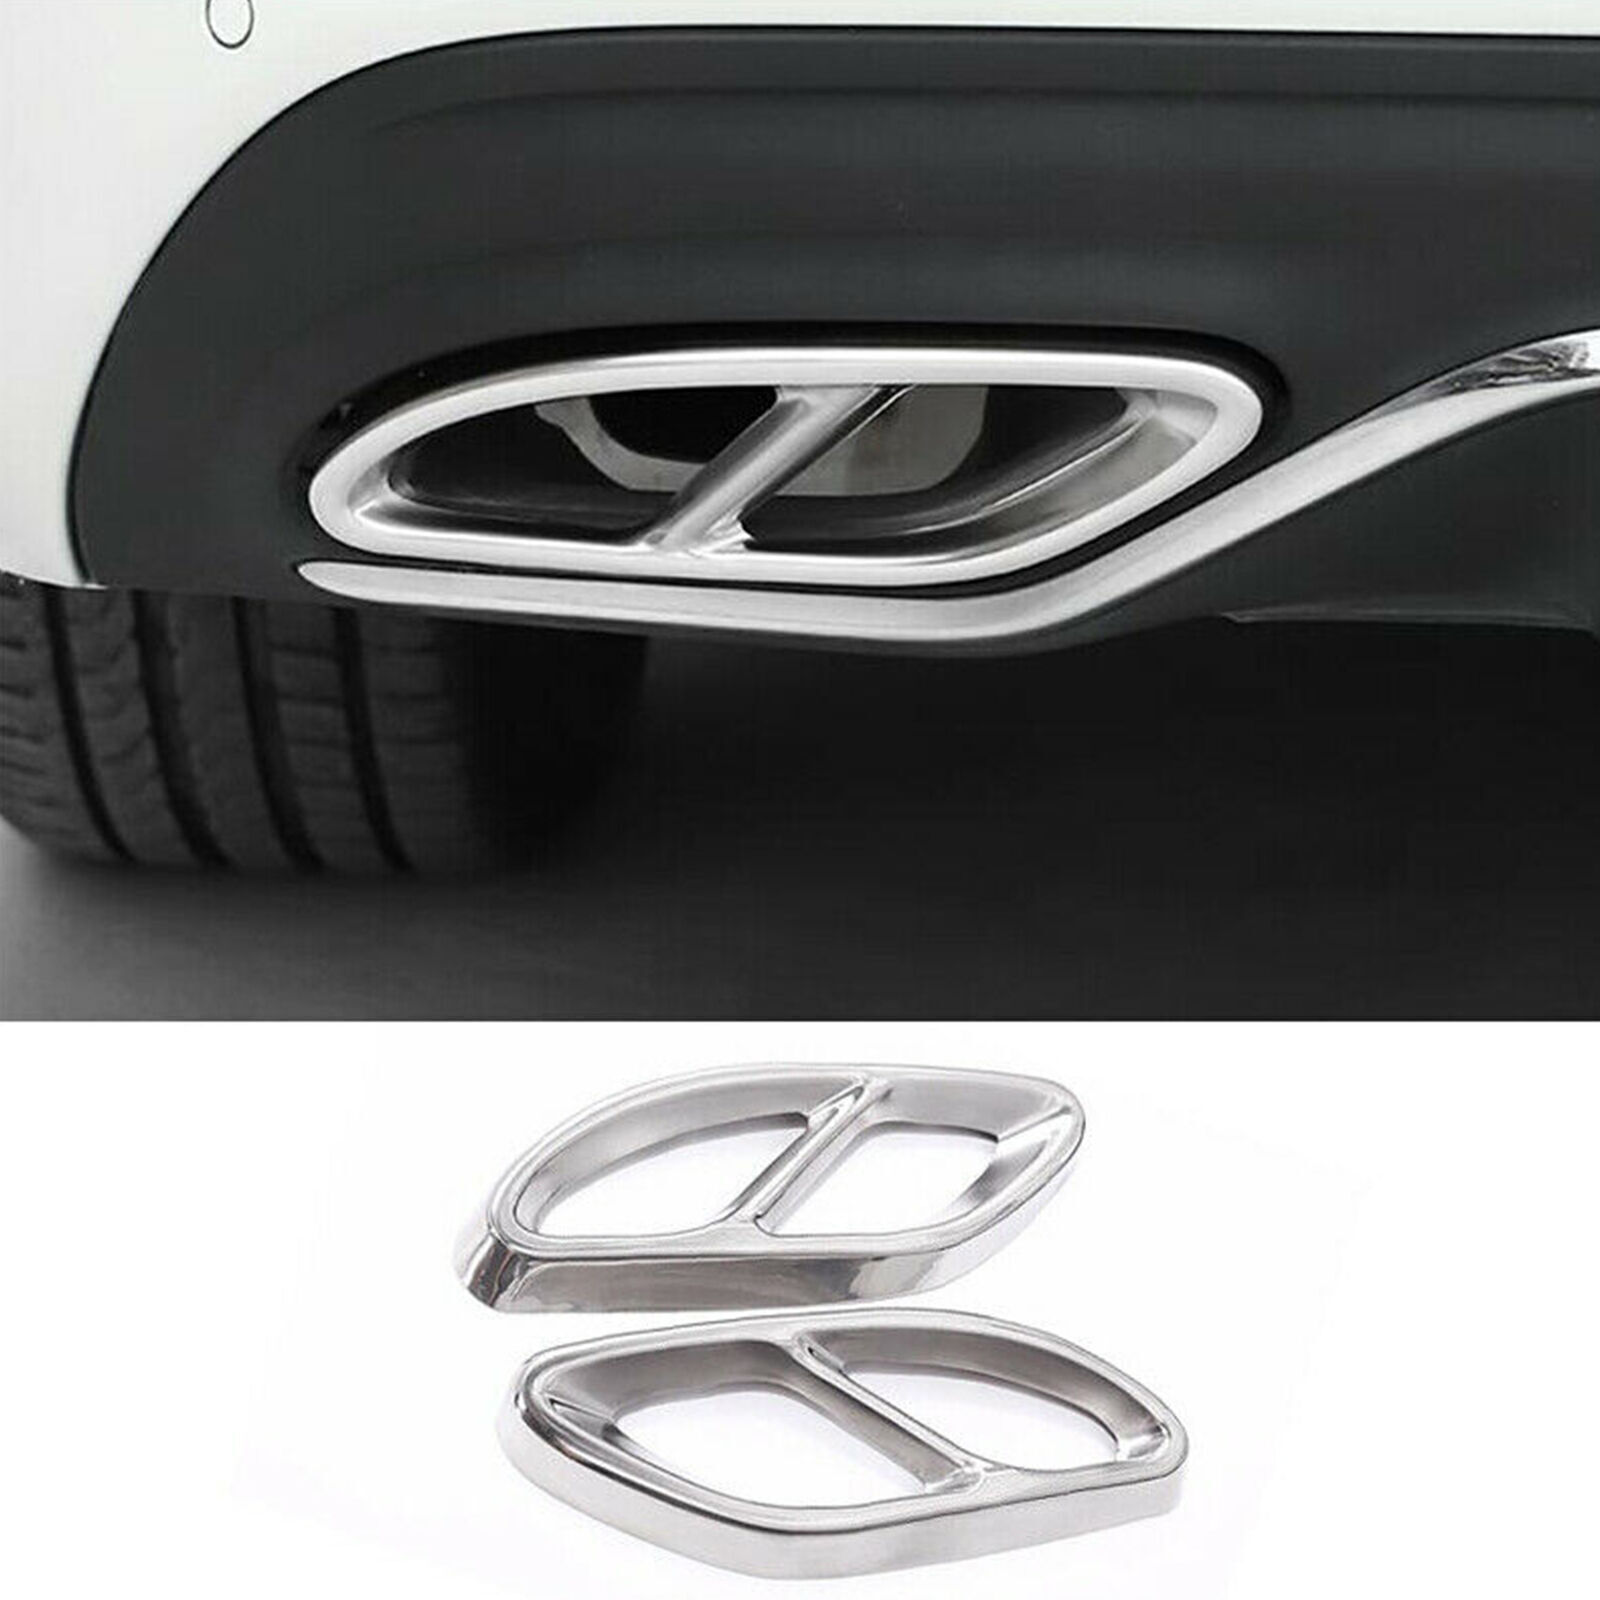 Fits For Benz A B C E CLA GLC GLE GLS Cylinder Exhaust Pipe Mufflers Cover Trim